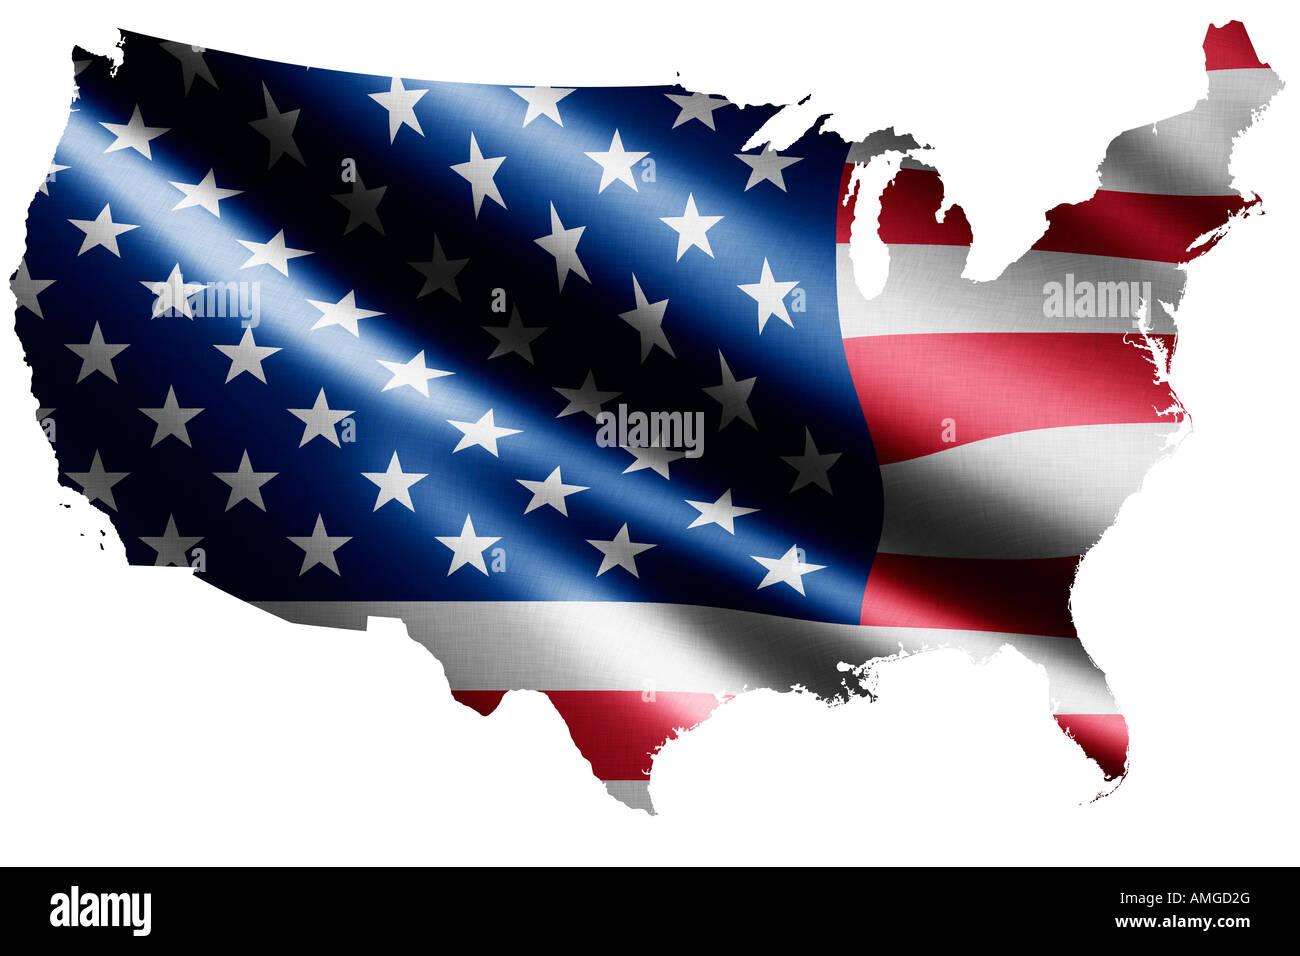 National flag of the United States of America as a map Stock Photo